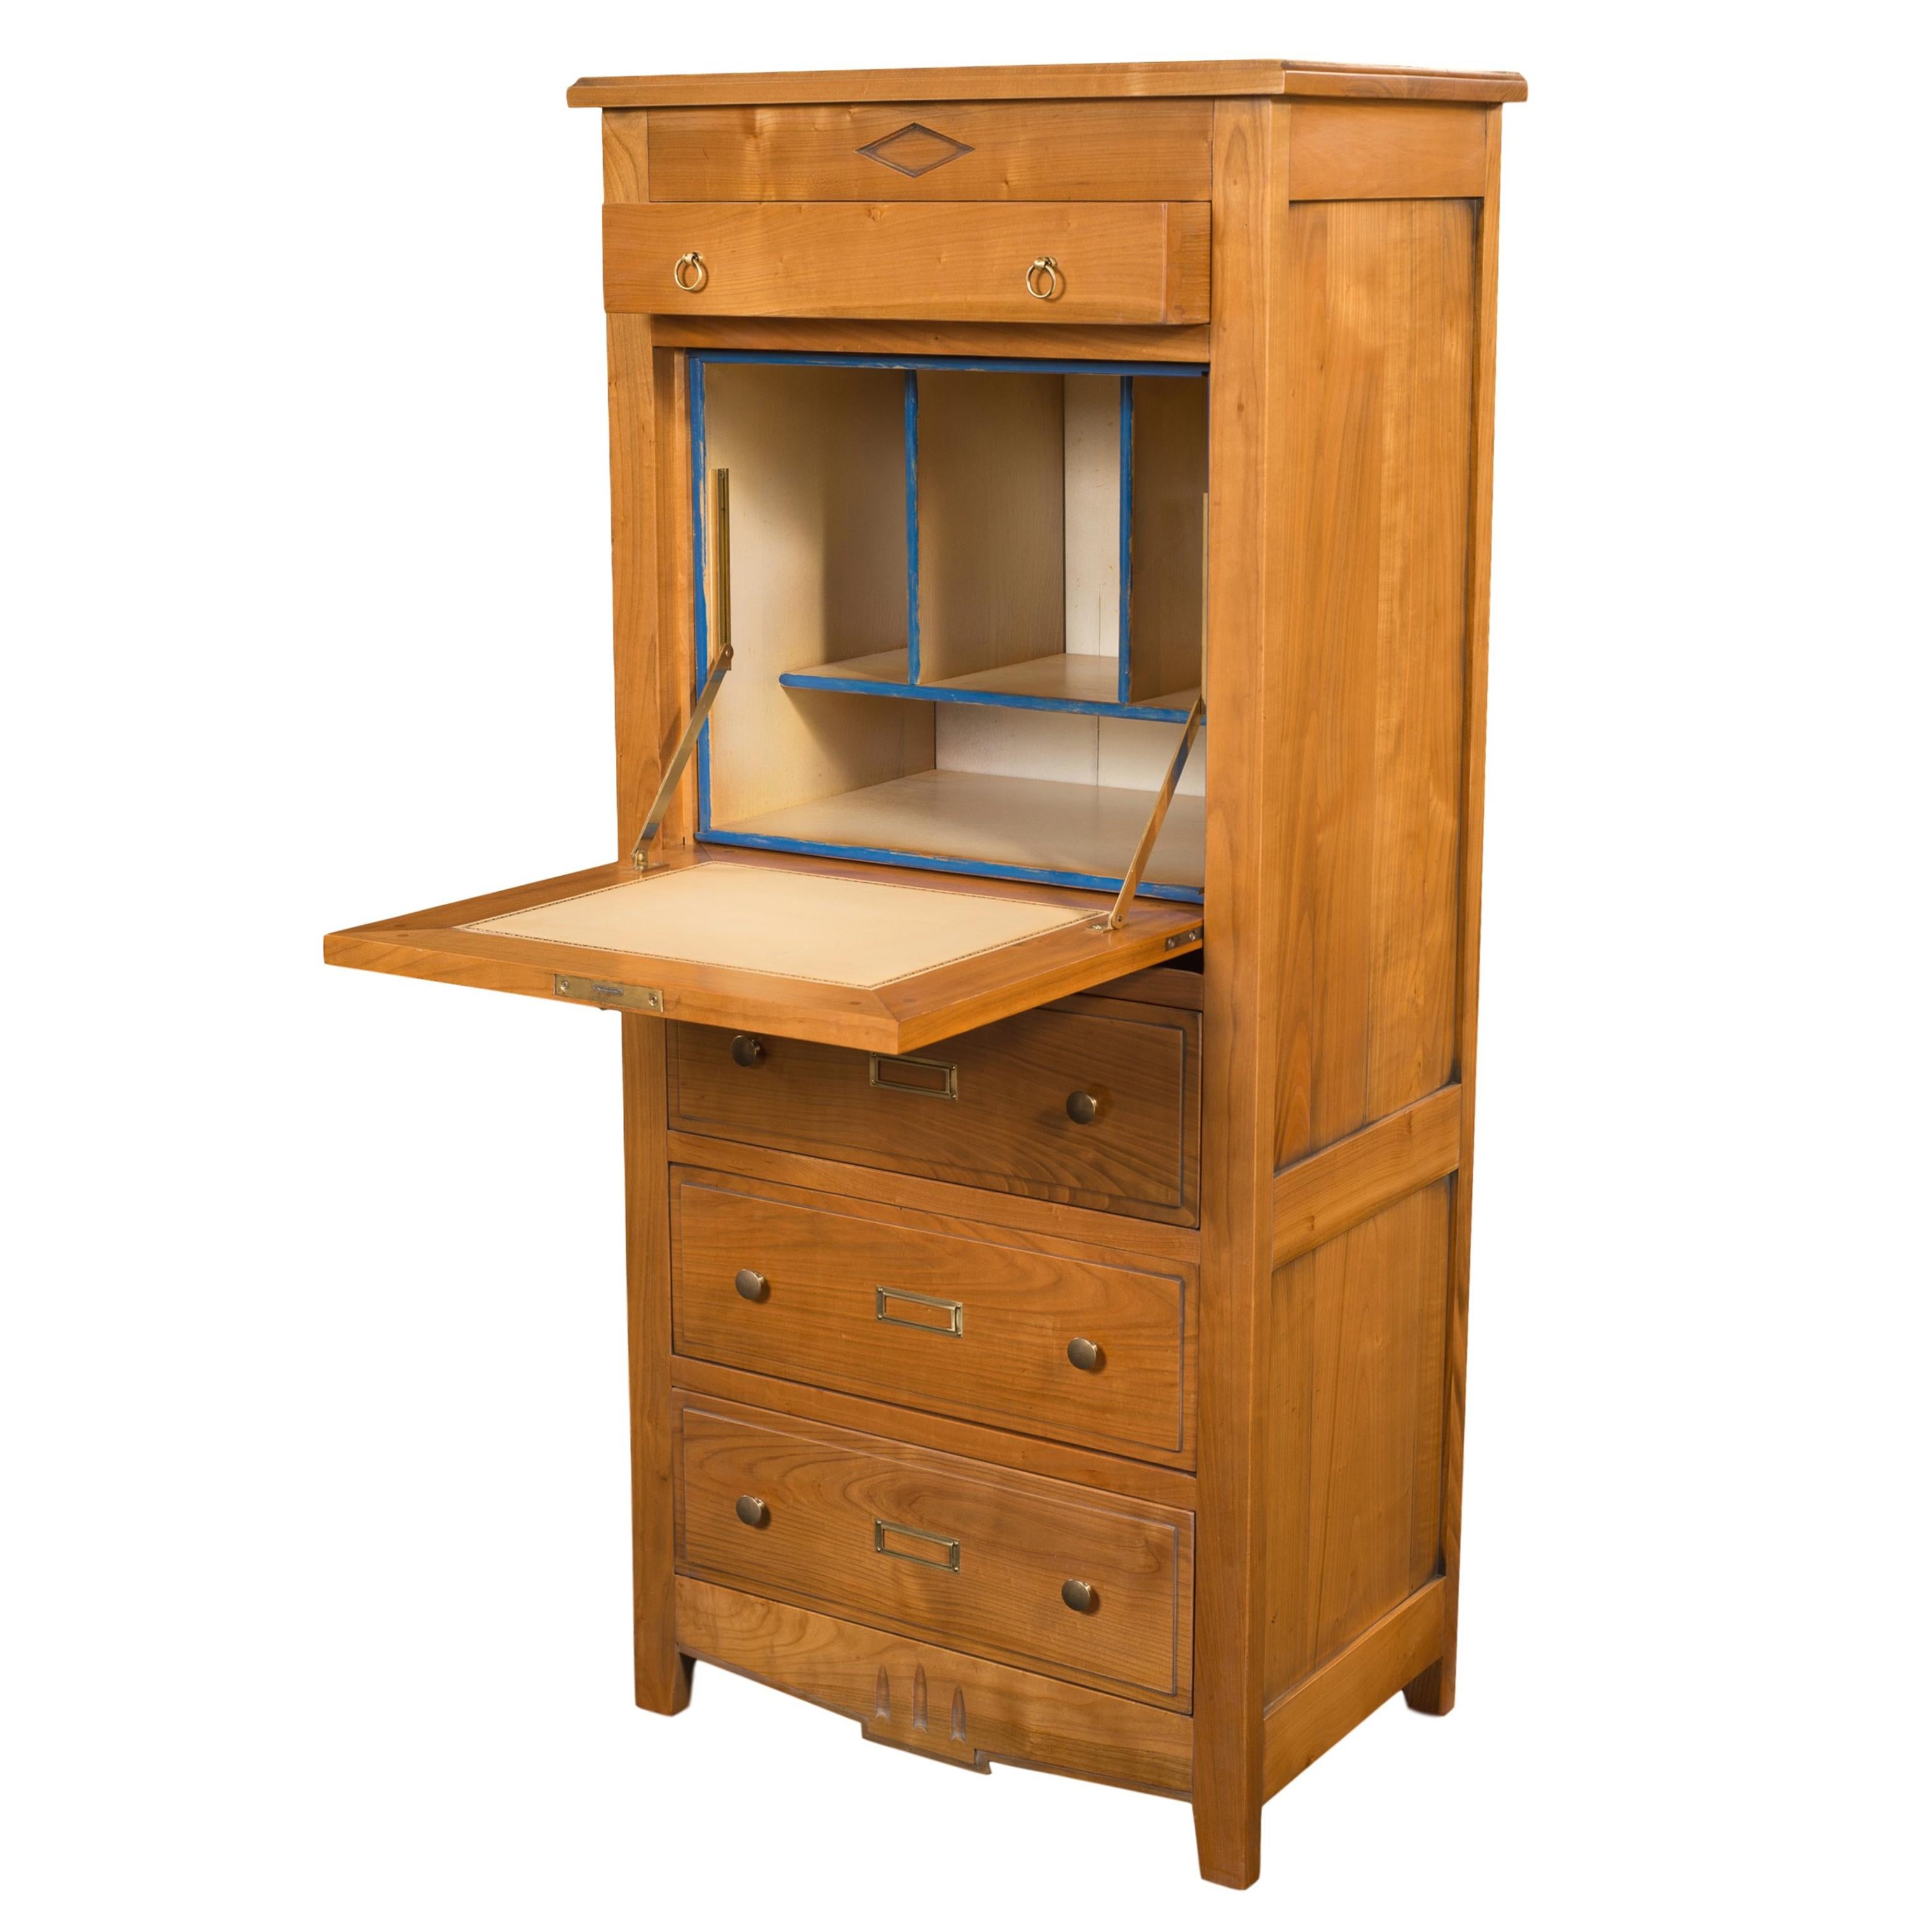 This Secretary is a handmade modernized interpretation of the French Directoire style at the end of the 18th century. This period is remarkable with its straight, classical and timeless lines.

It is made of French Solid Cherry wood. Its classical